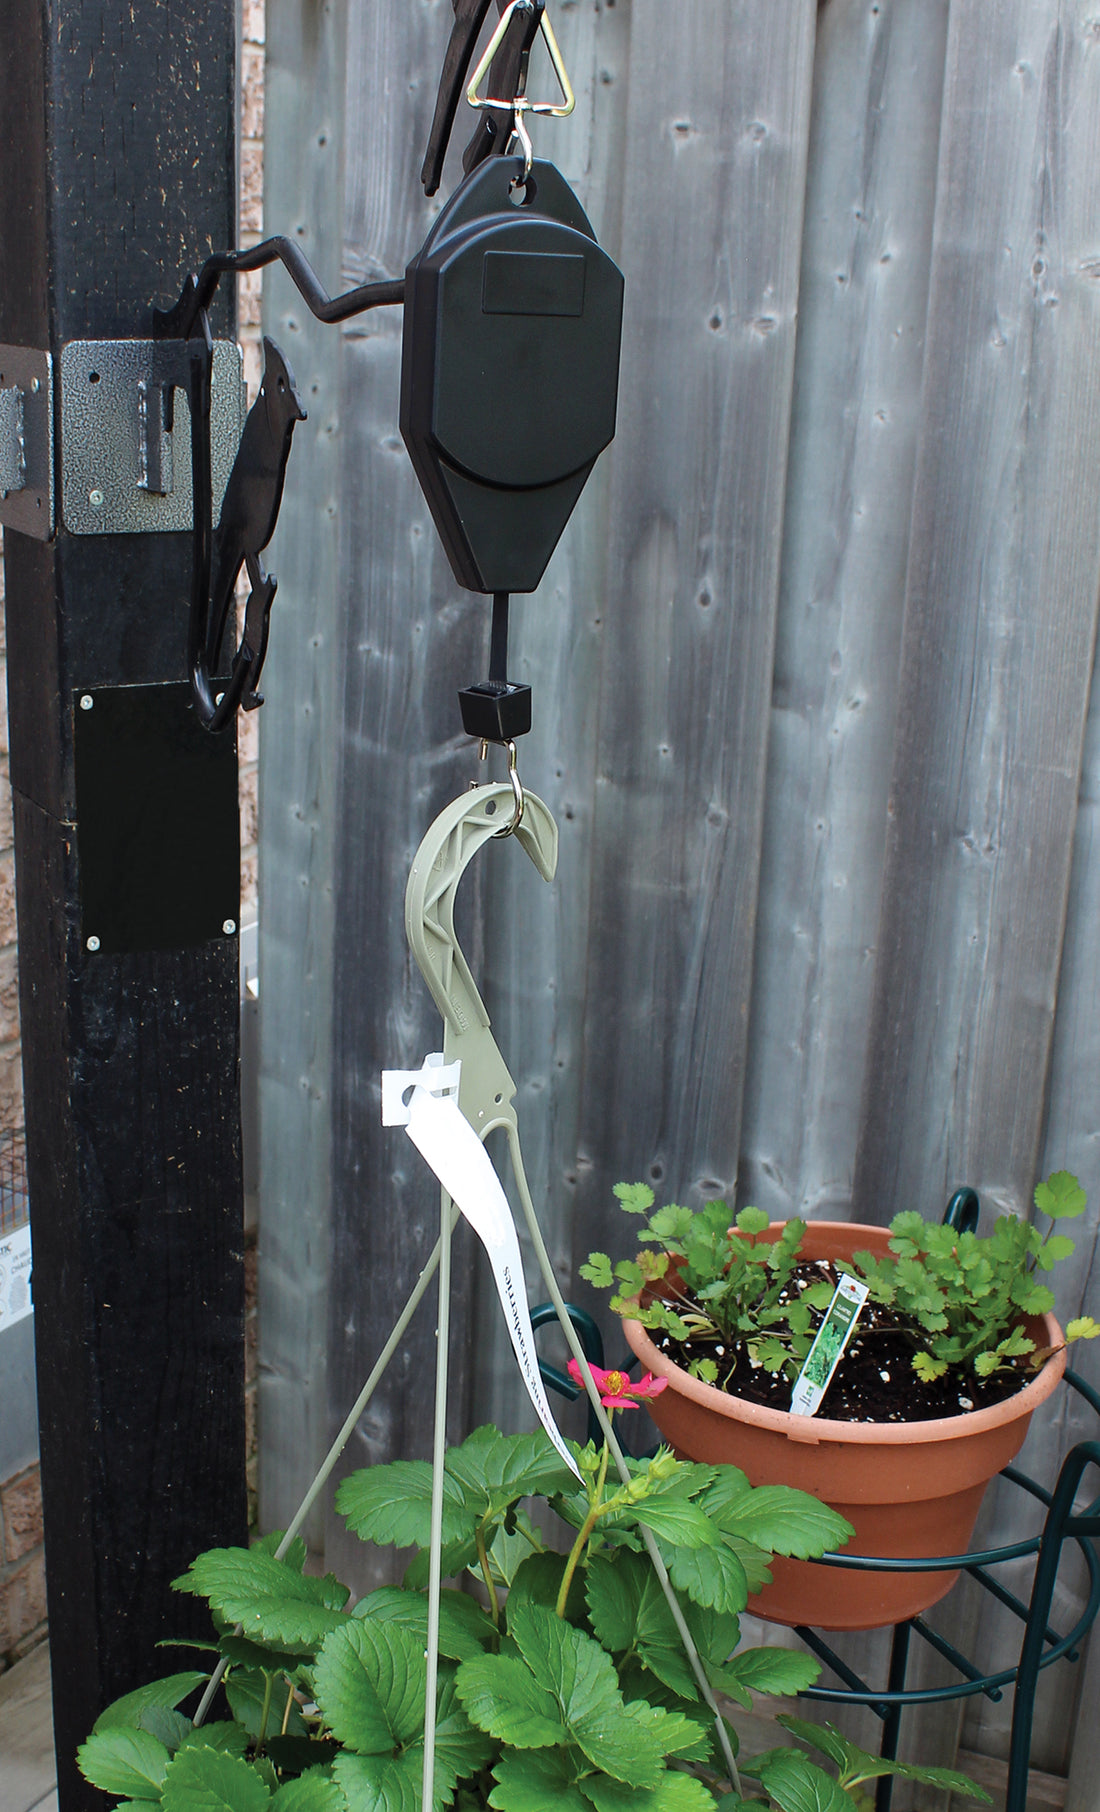 Hanging device is attached to a pole outdoors where it is holding up a plant that is hooked on the bottom ring.